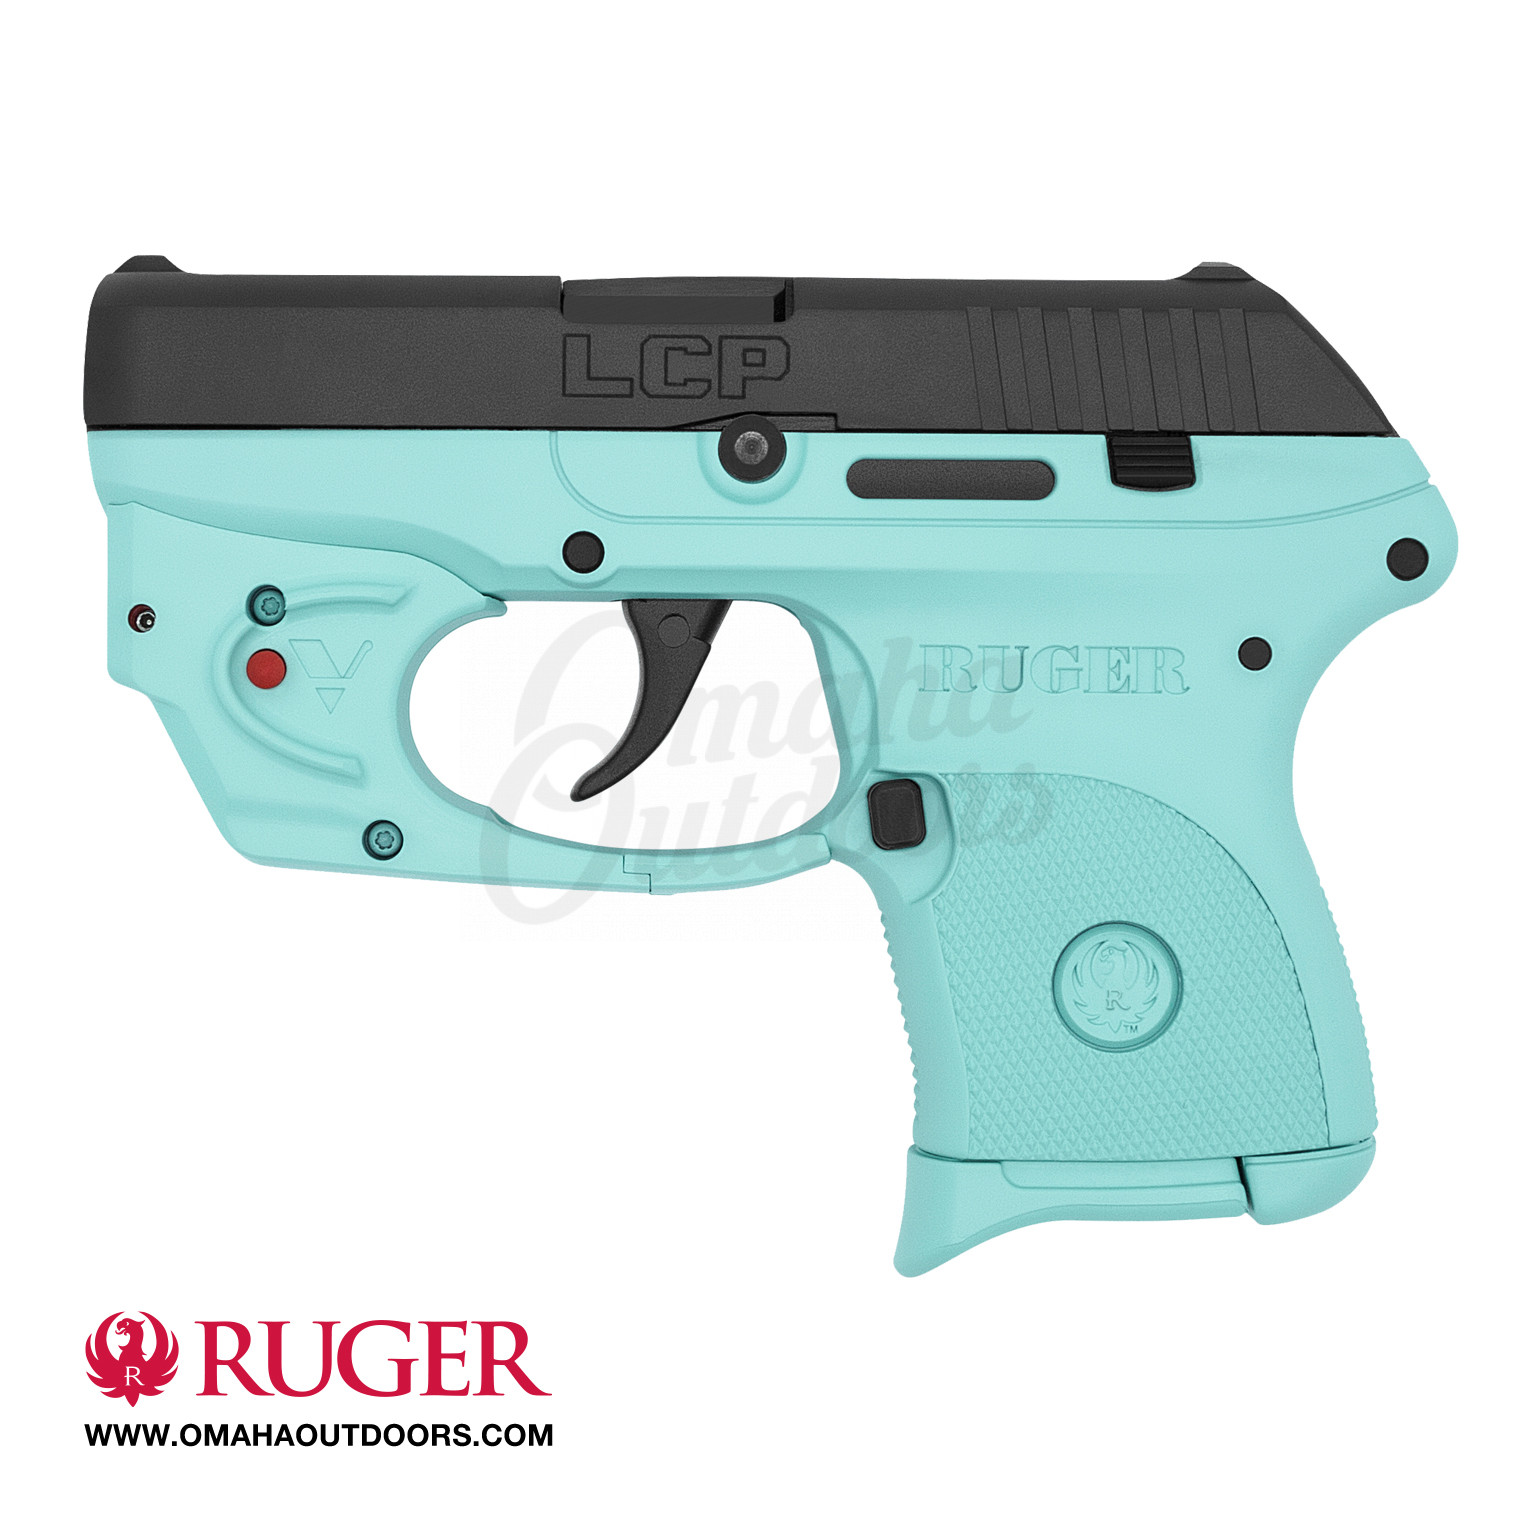 Ruger Lcp Tiffany Blue Pistol 6 Rd 380